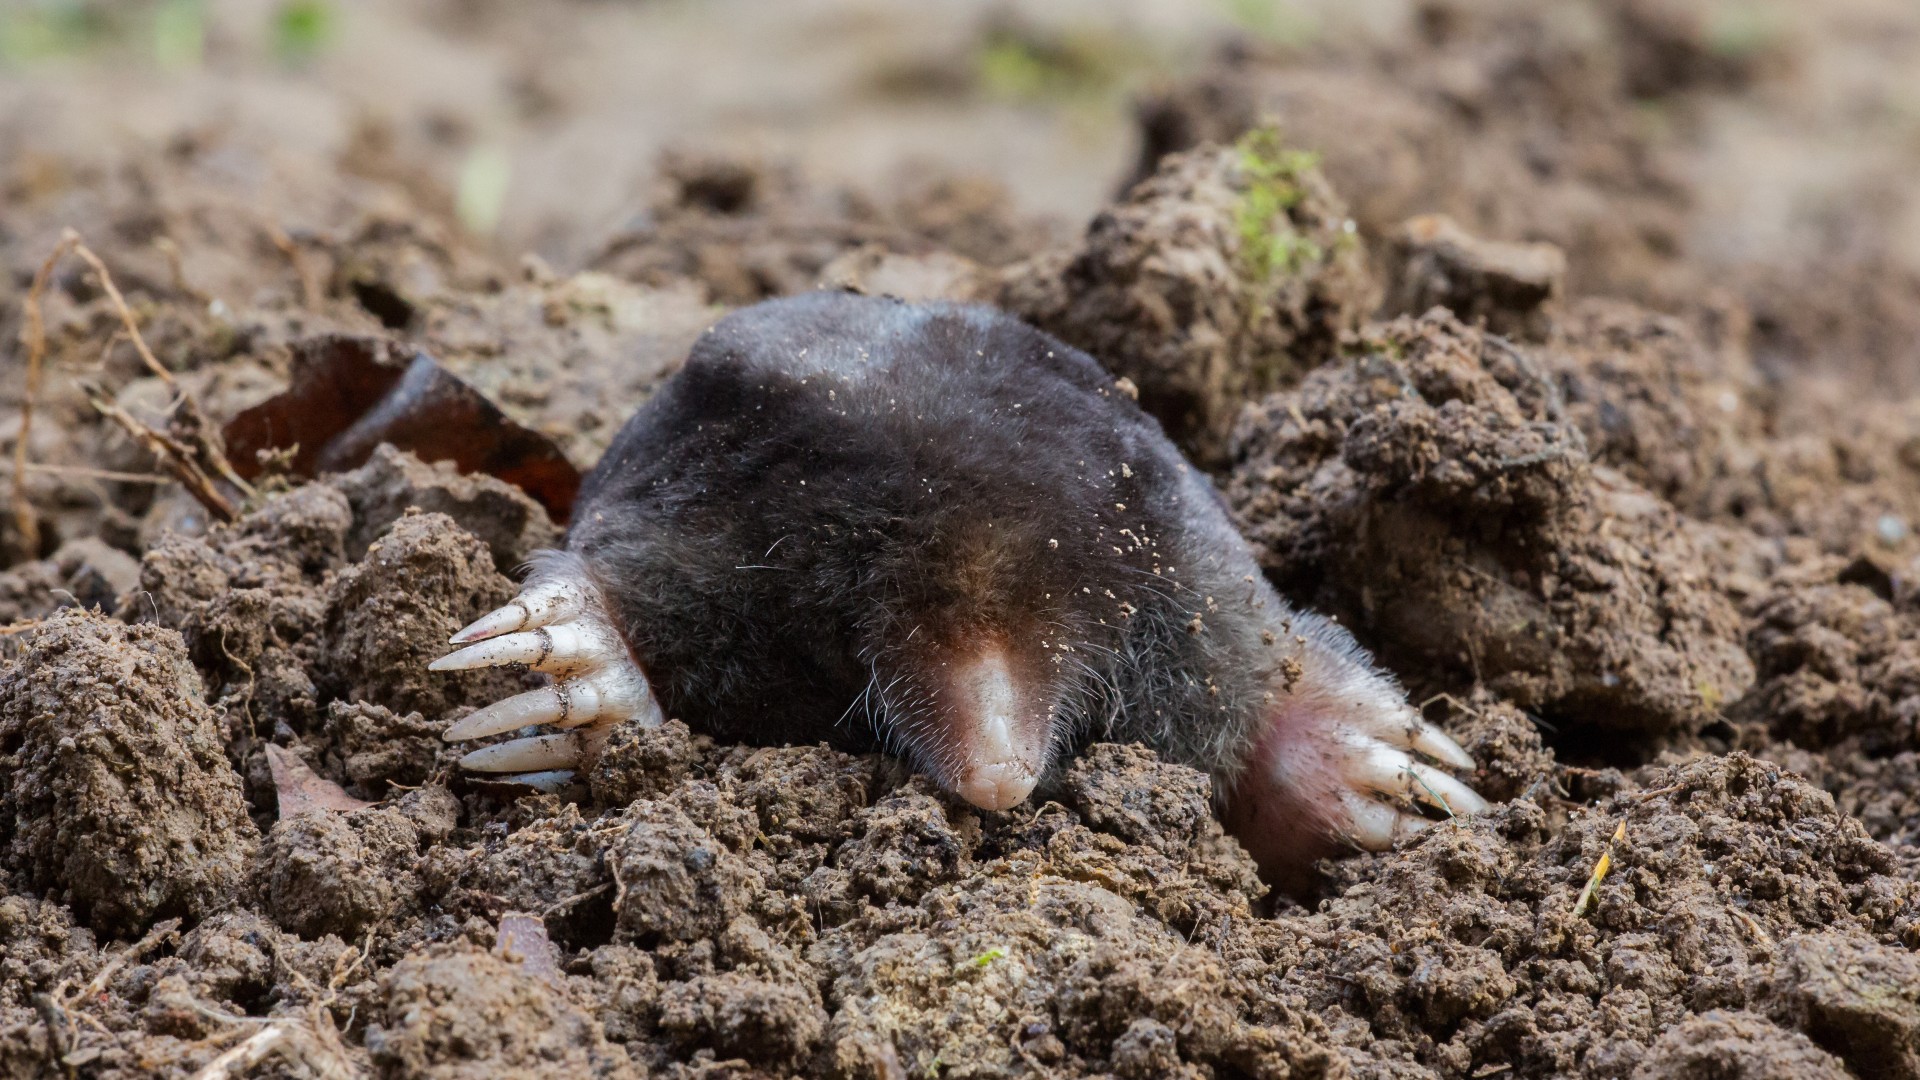 How Do Moles Survive Without Sight?